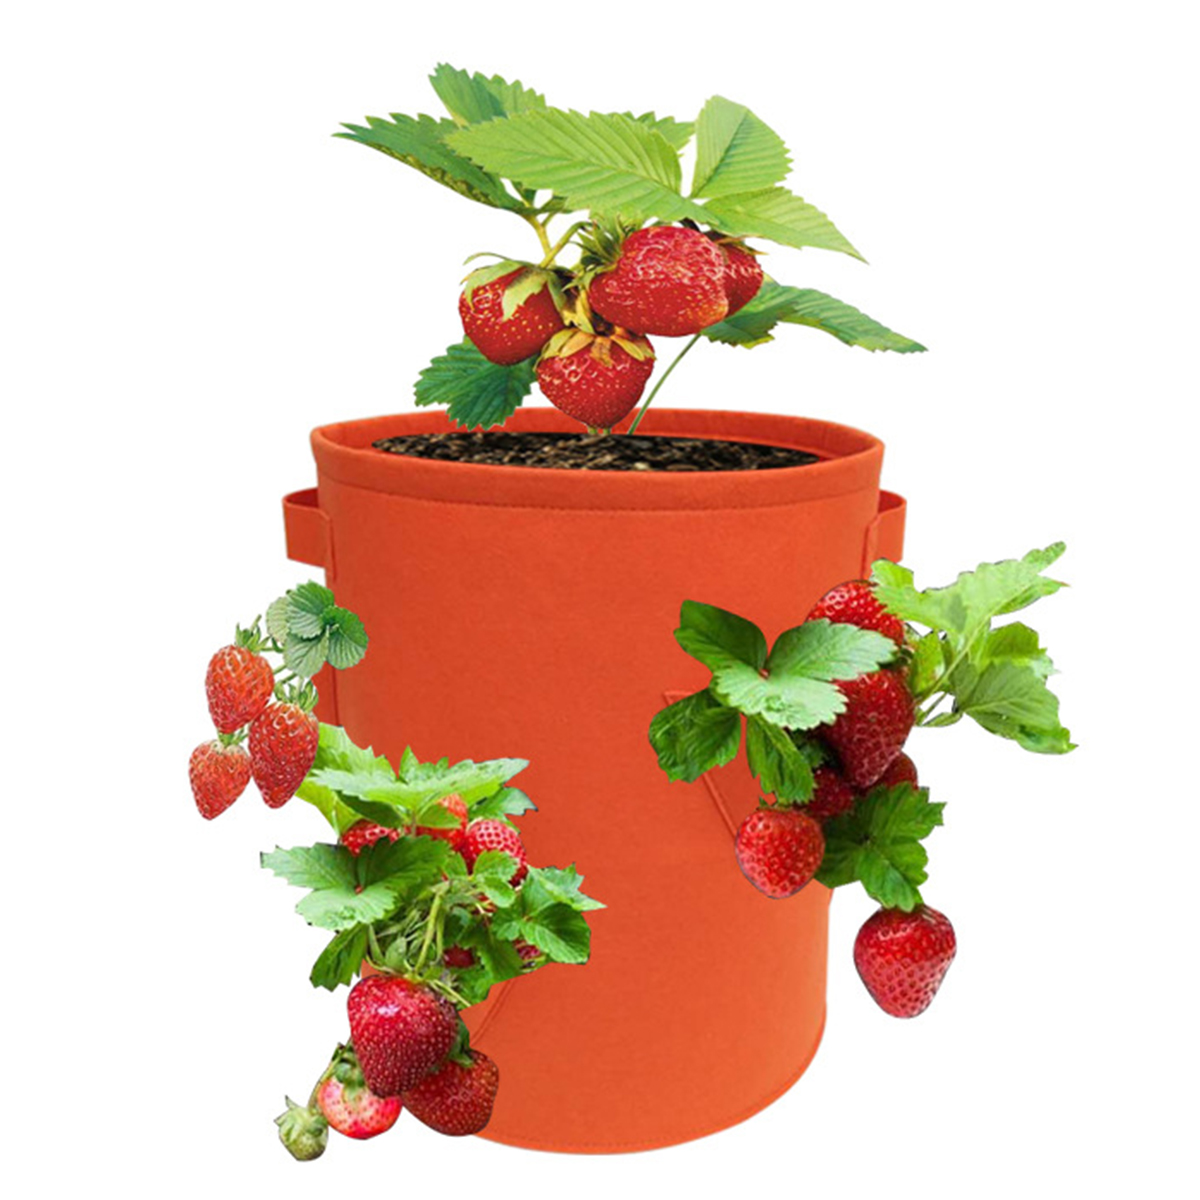 5710-Gallon-Strawberry-Planting-Grow-Bag-Plant-Bags-with-368-Side-Pockets-1751911-9